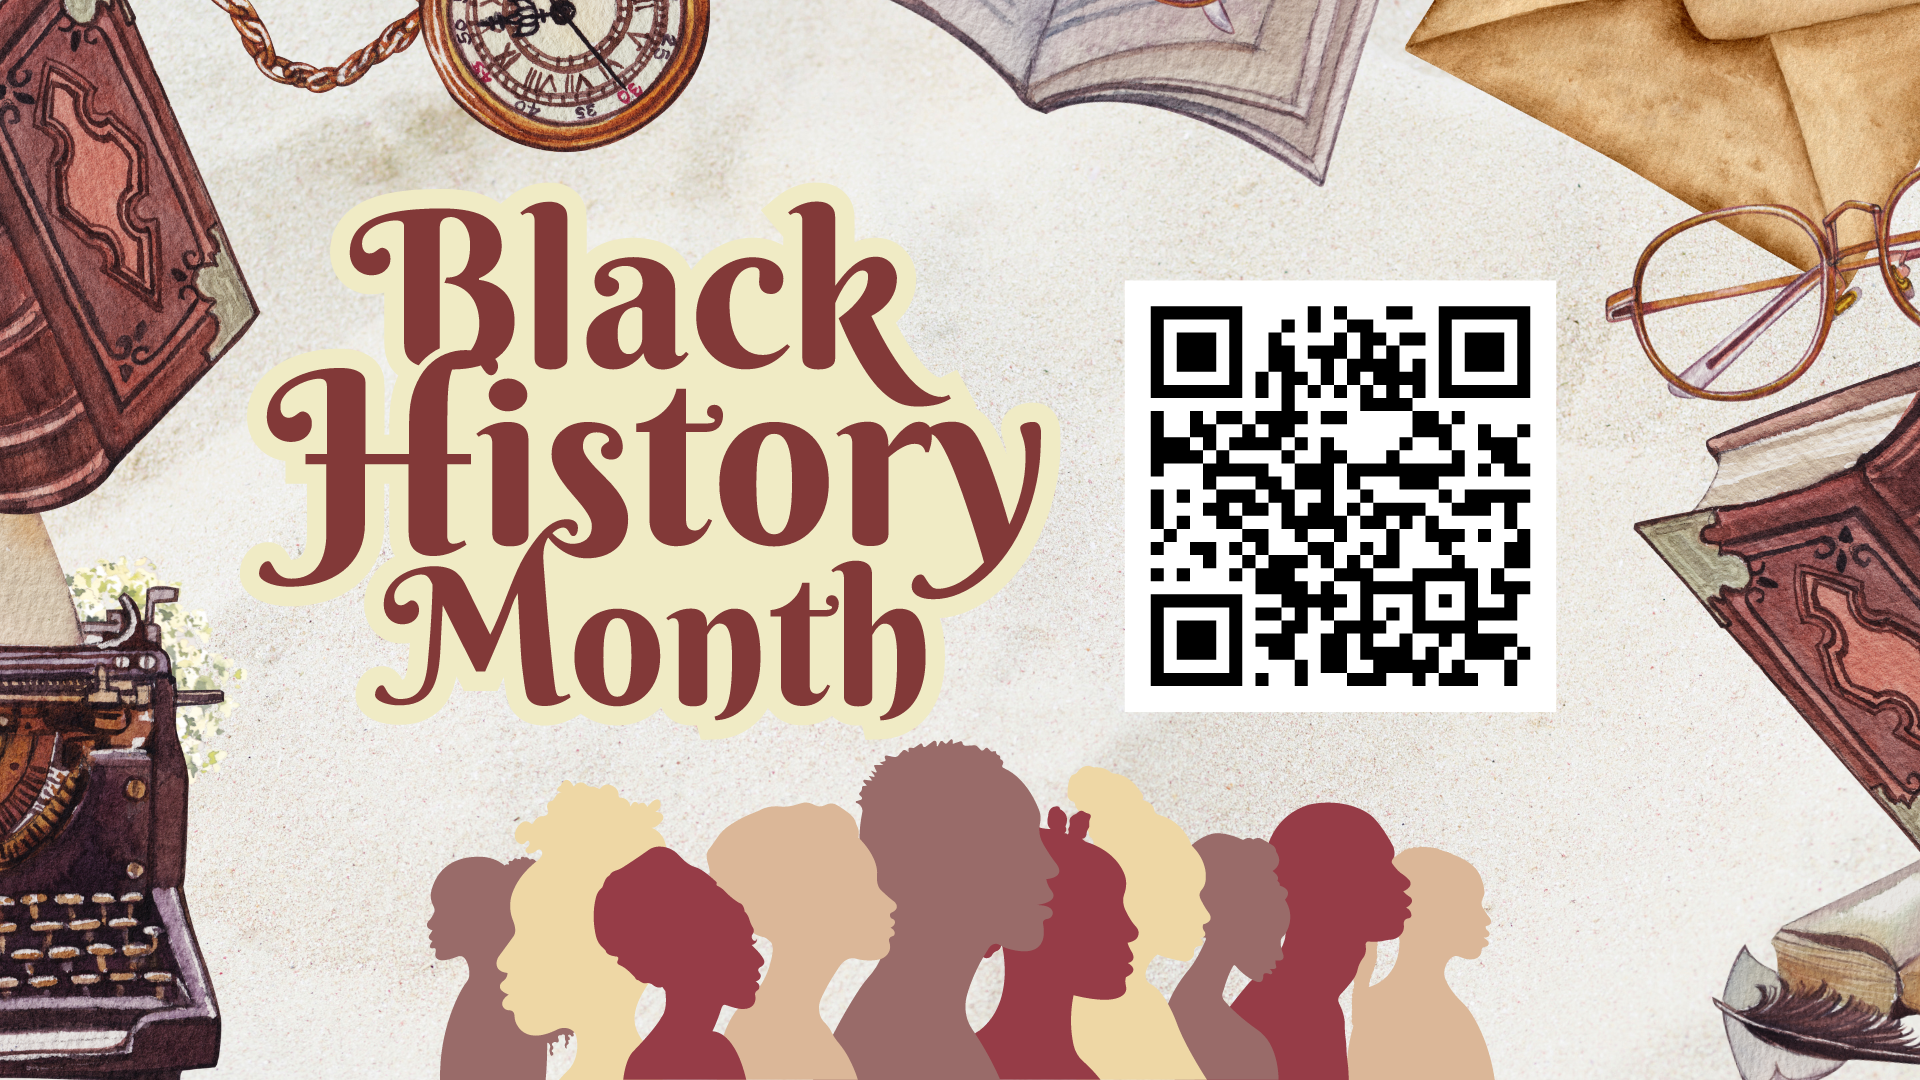 Black History Month: Who is this quiz